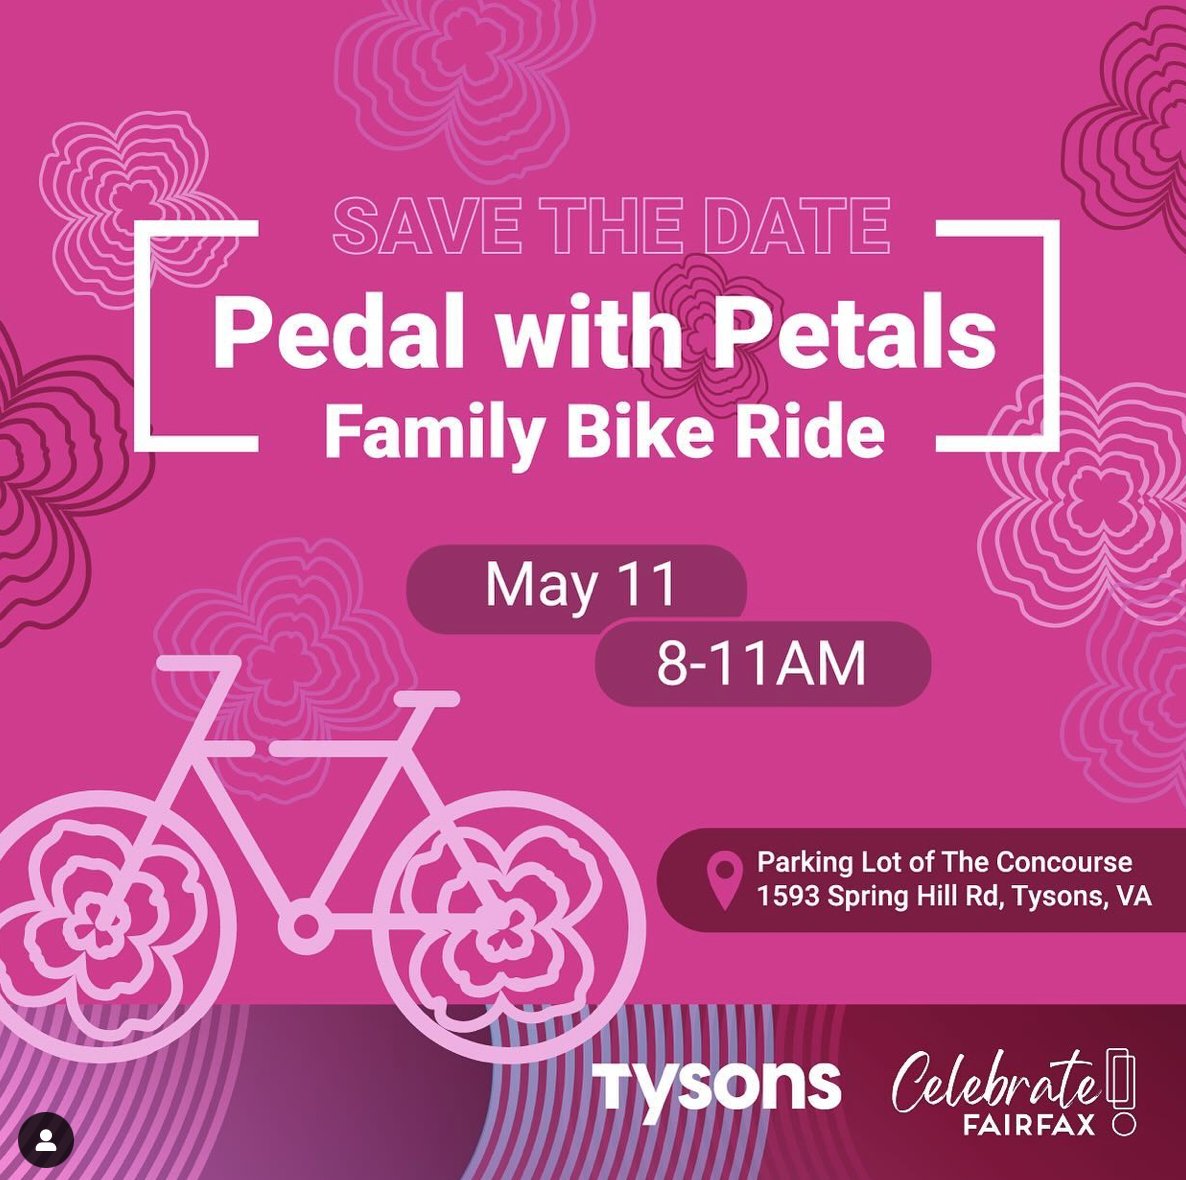 Join us for Tyson’s 2nd annual #PedalWithPetals on May 11th from 8-11 AM. Main ride starts at 9 AM with a family-friendly loop at 9:30 AM. , Enjoy free bike tune-ups, face painting, coffee, pastries, and a sweet ice cream treat post-ride. Regiser here: tysonsva.org/pedal-with-pet…